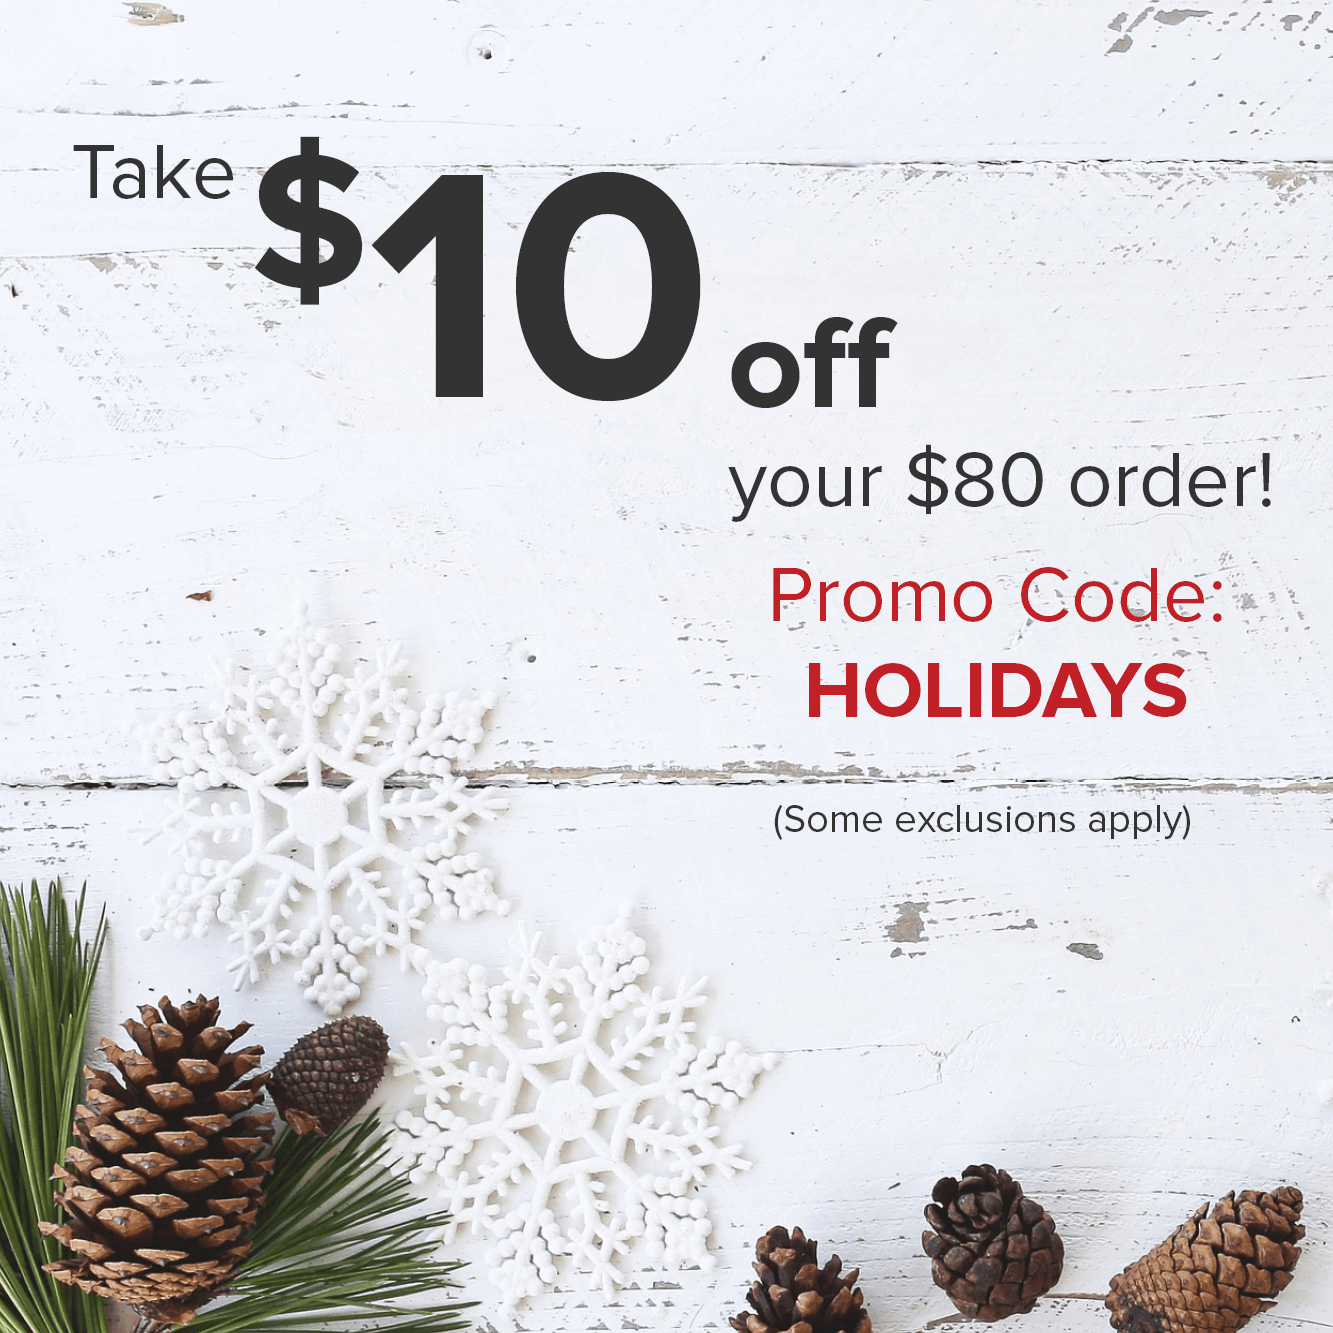 Take $10 off your $80 order!